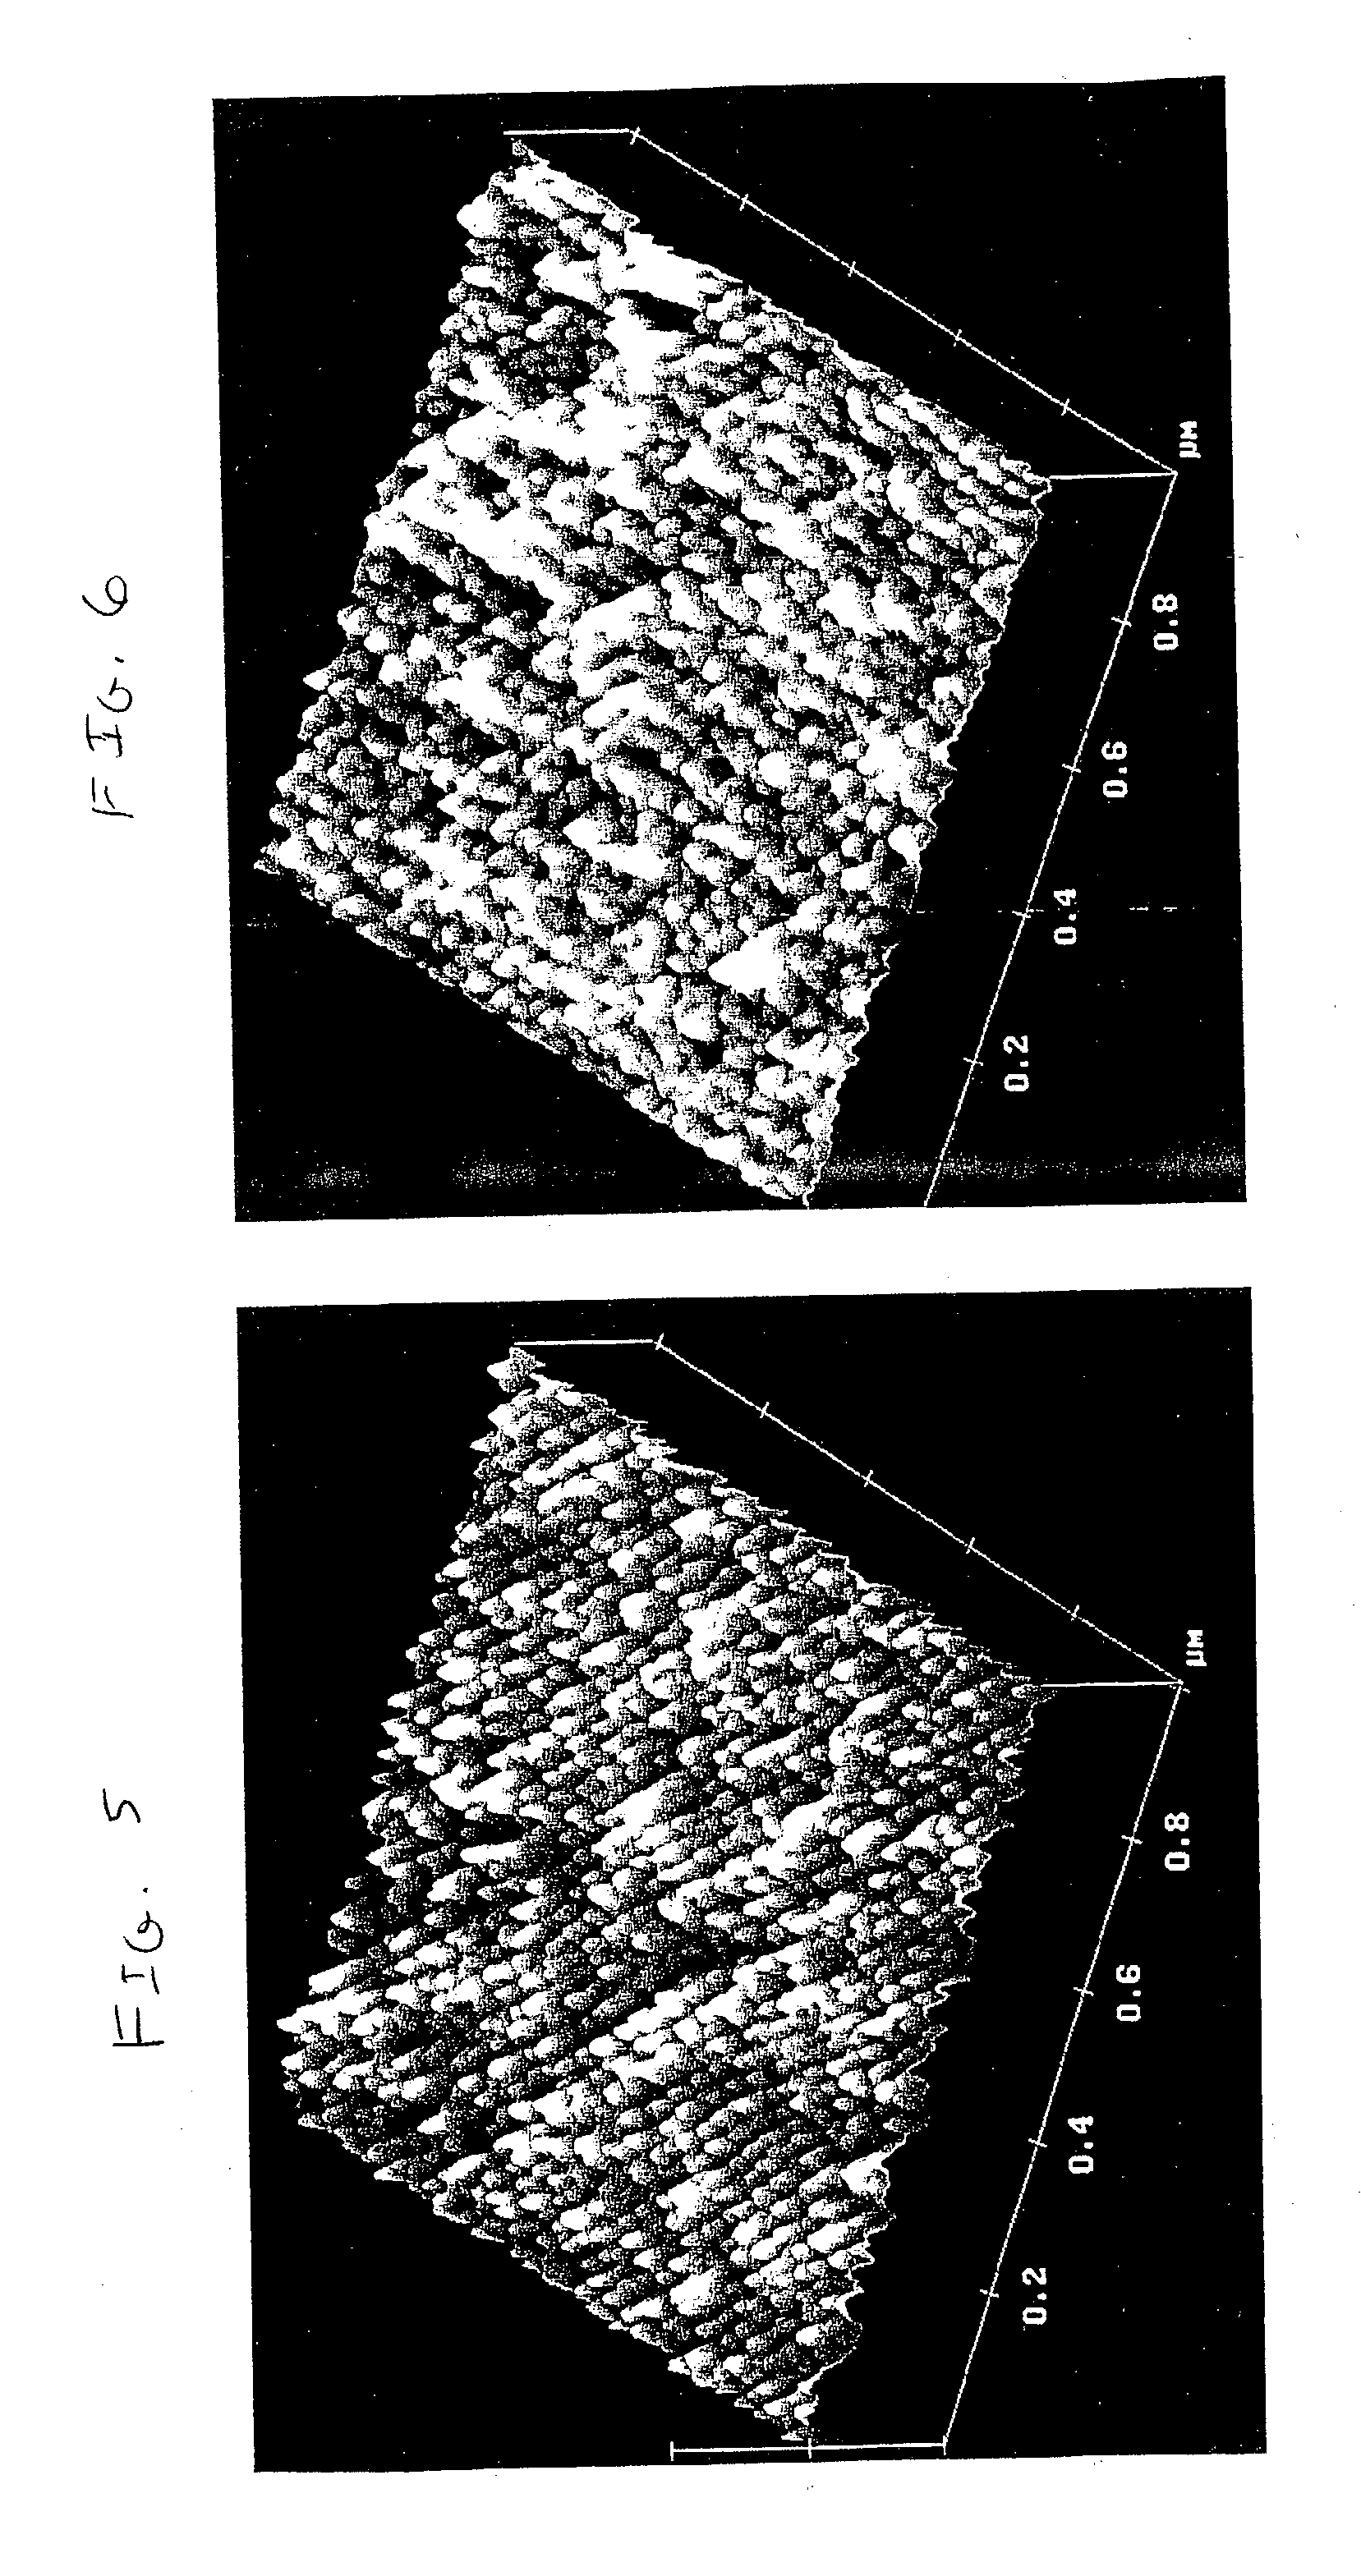 Replication of nanoperiodic surface structures